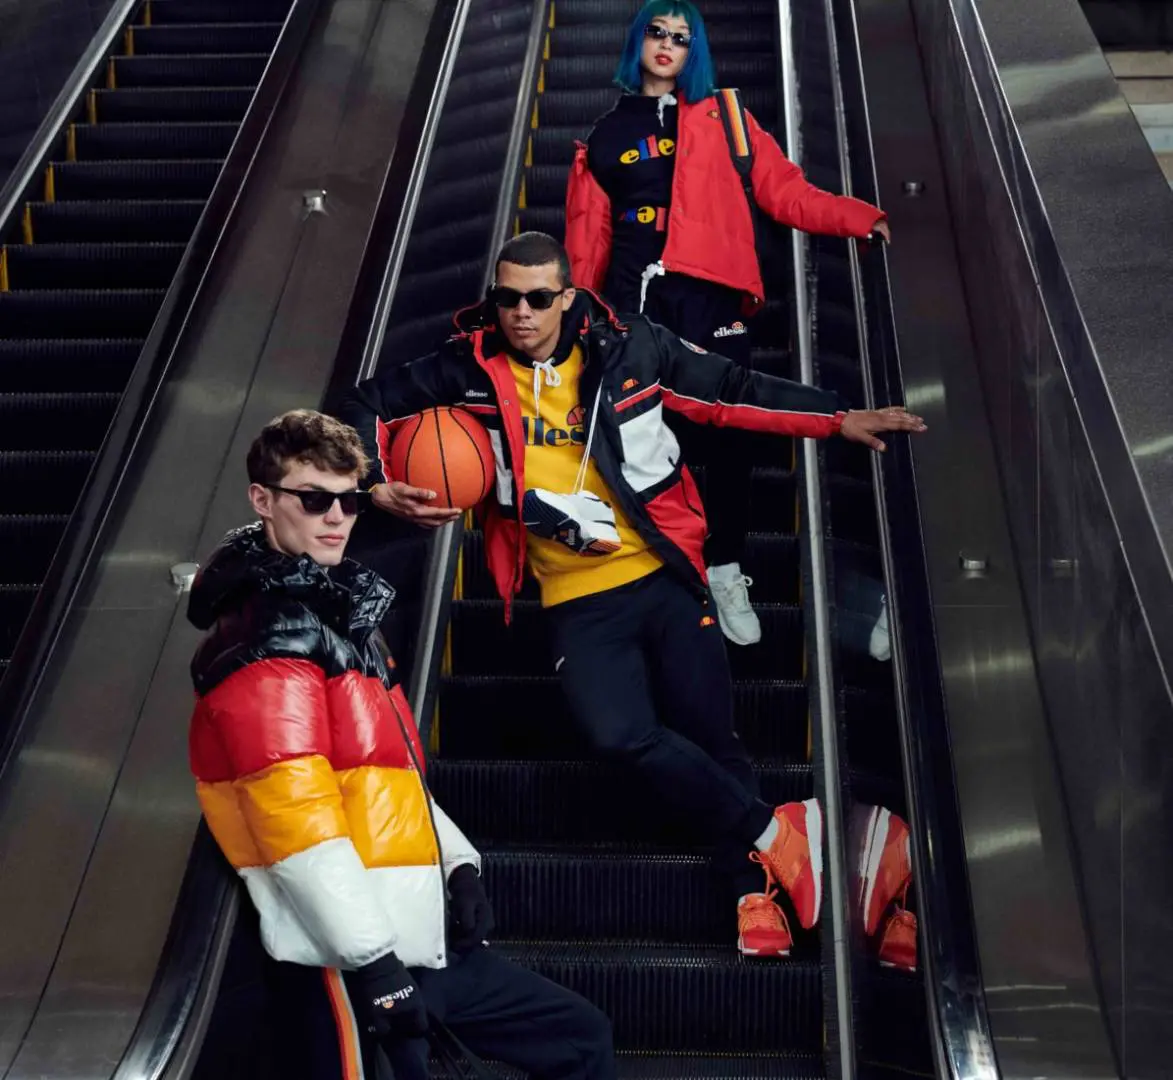 Italian Sports Fashion Raise Your Game With Our ellesse ‘FOR THE WIN’ Campaign